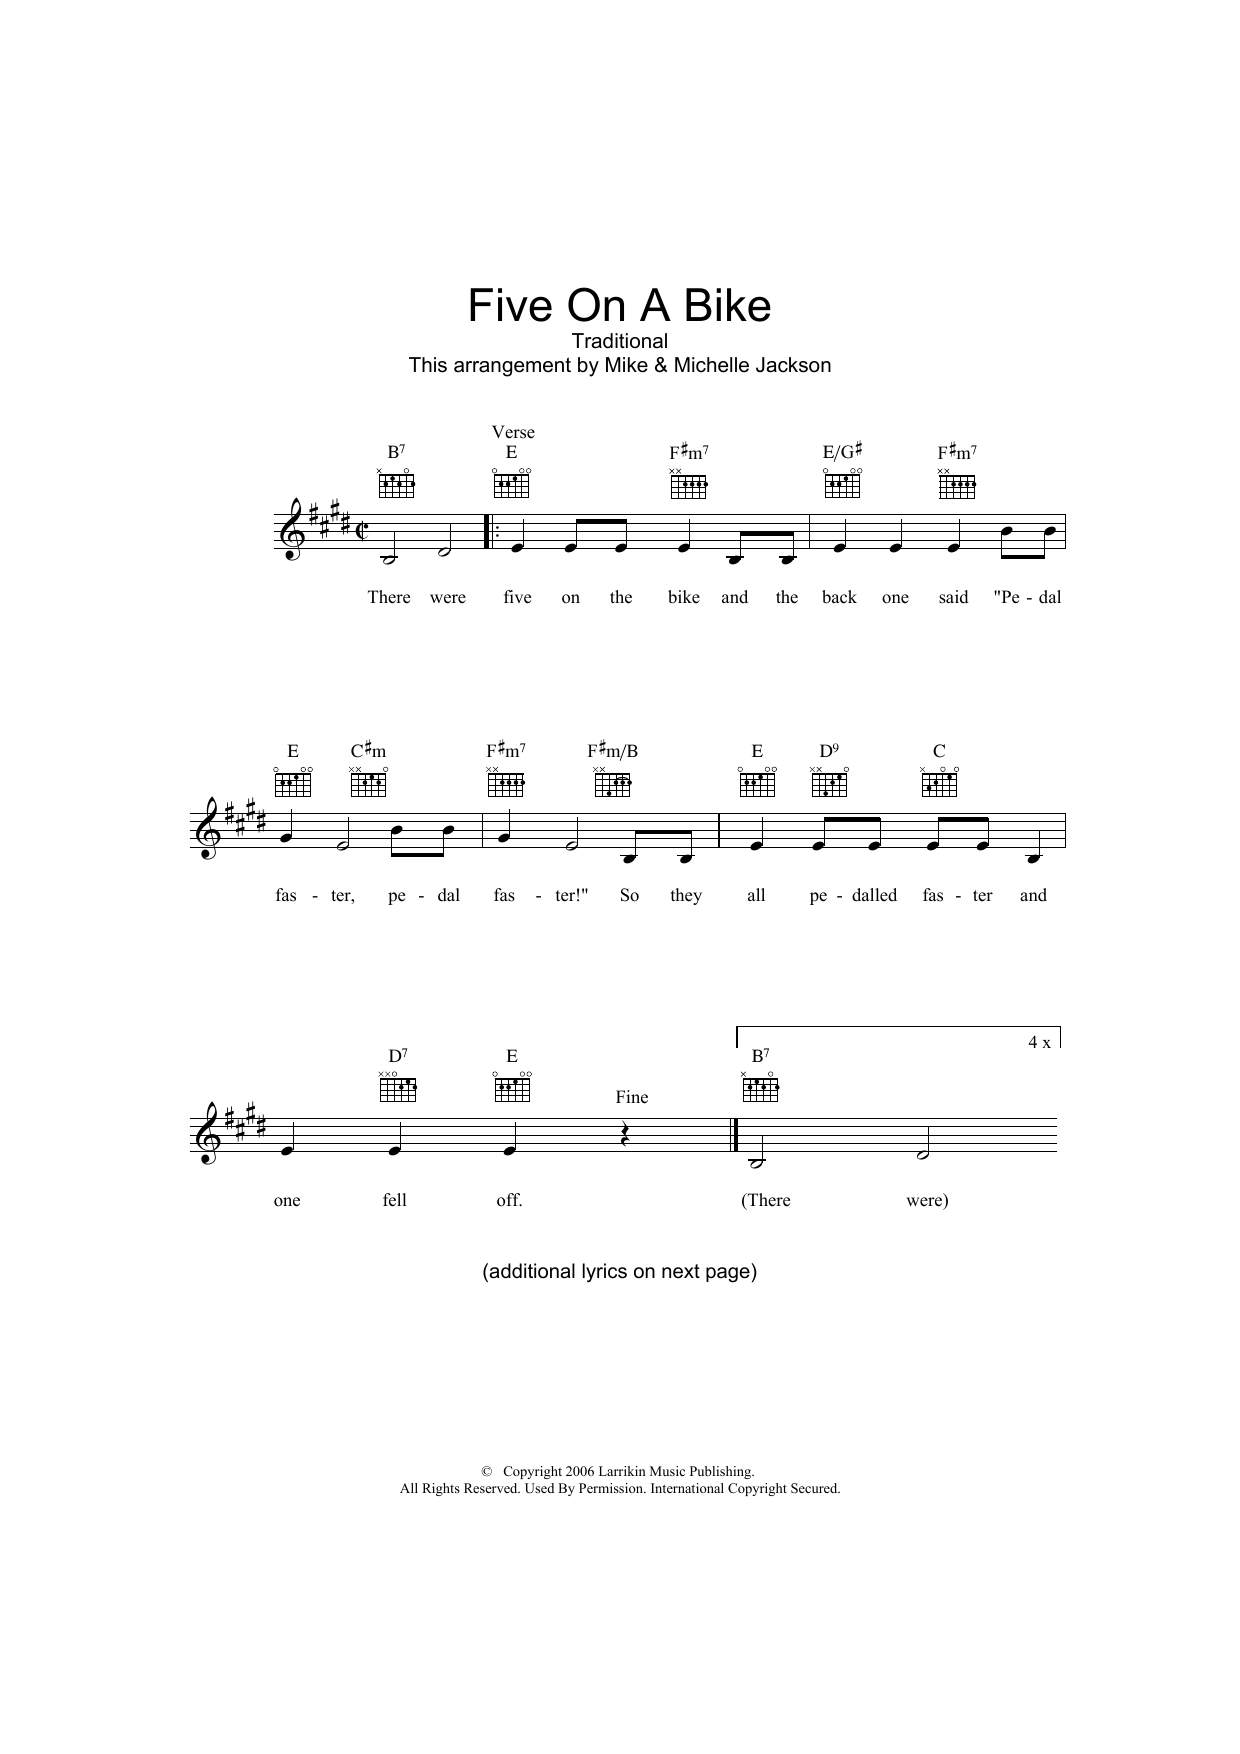 Download Traditional Five On A Bike Sheet Music